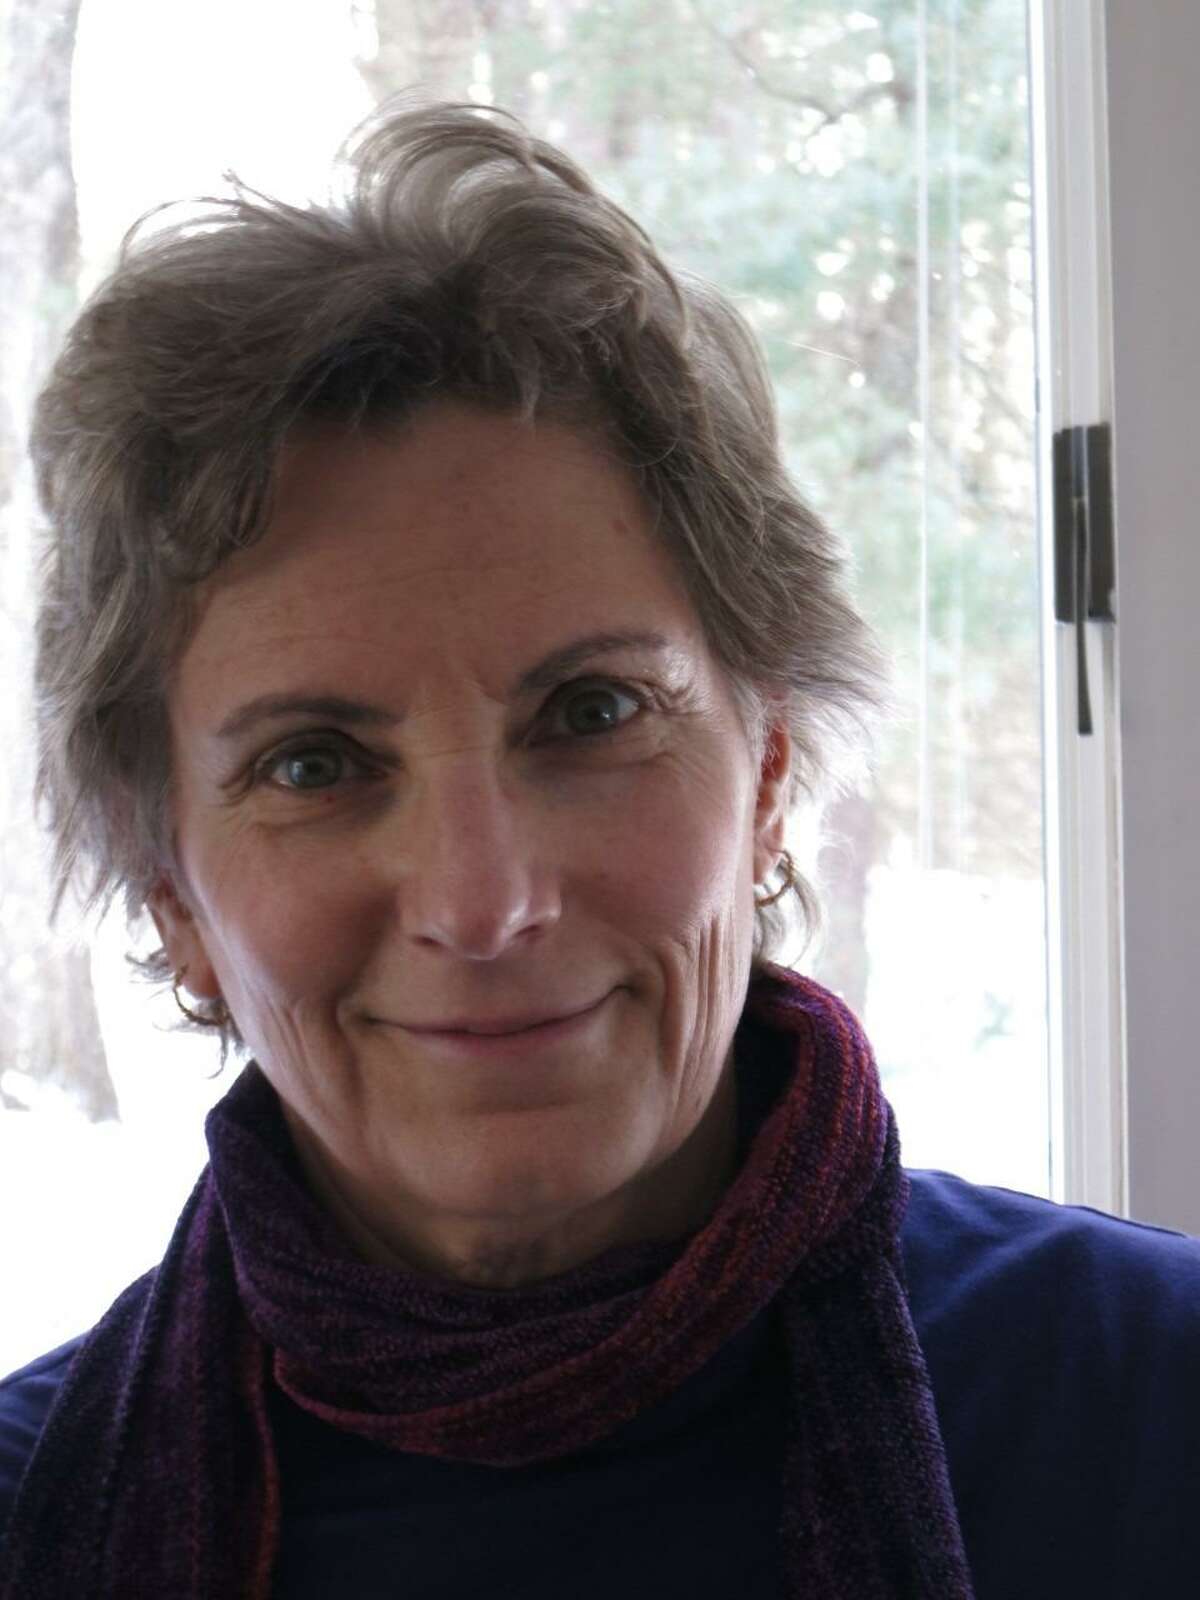 The New Canaan Land Trust has published its first podcast, which is with Dr. Sara Lewis, who is also a scientist, and biology professor.